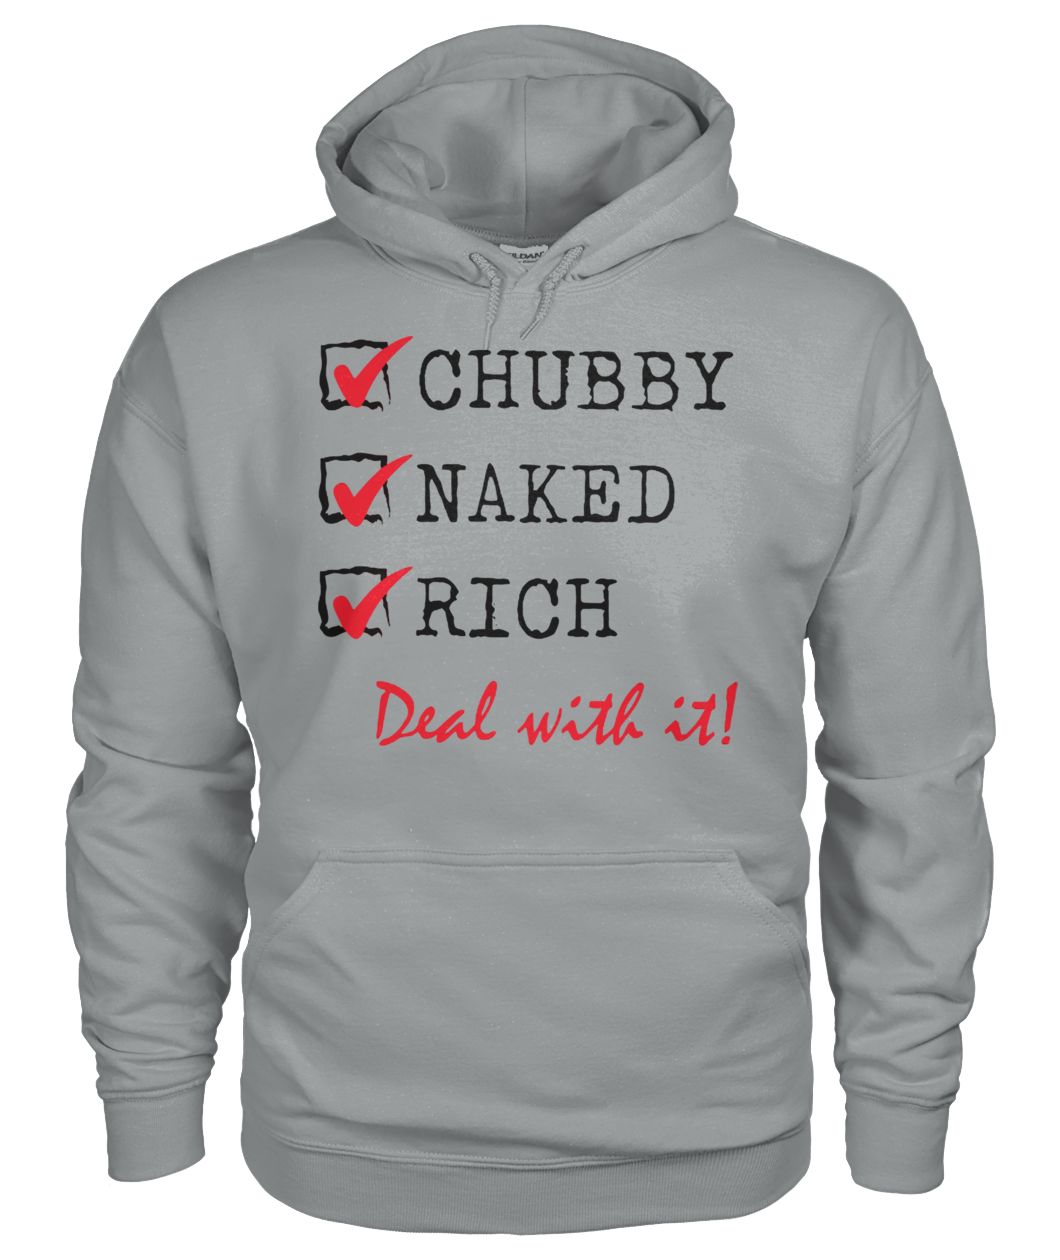 Chubby naked rich deal with it gildan hoodie